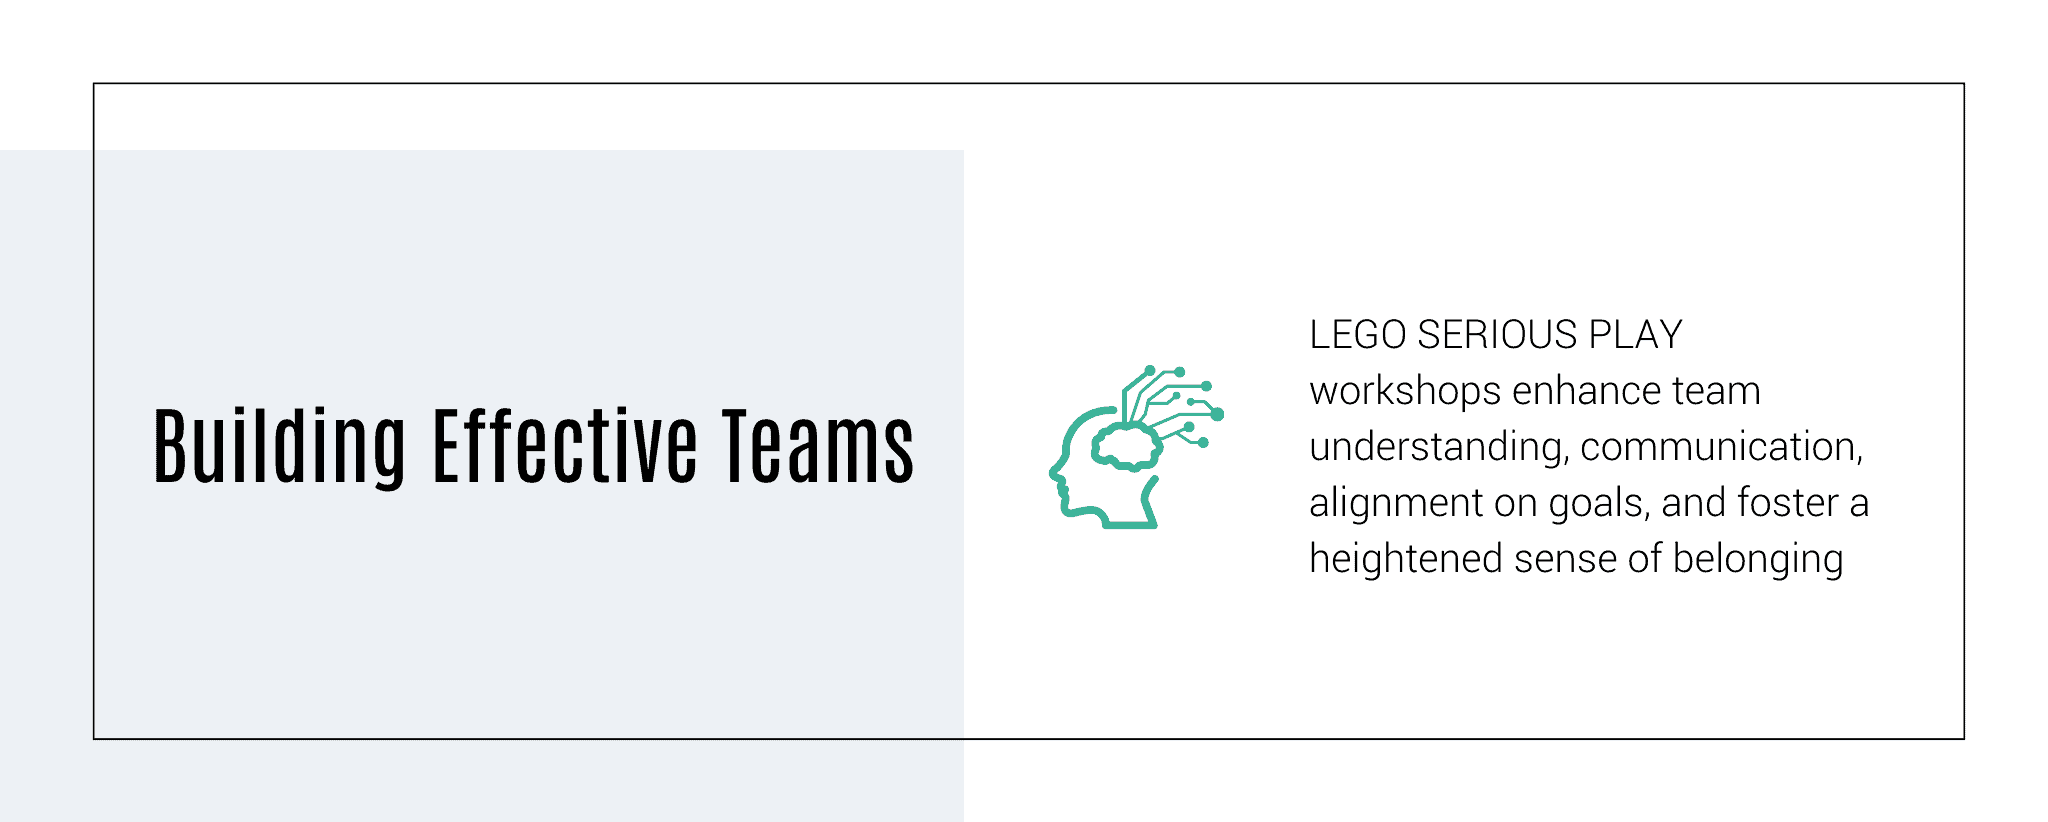 LEGO SERIOUS PLAY community